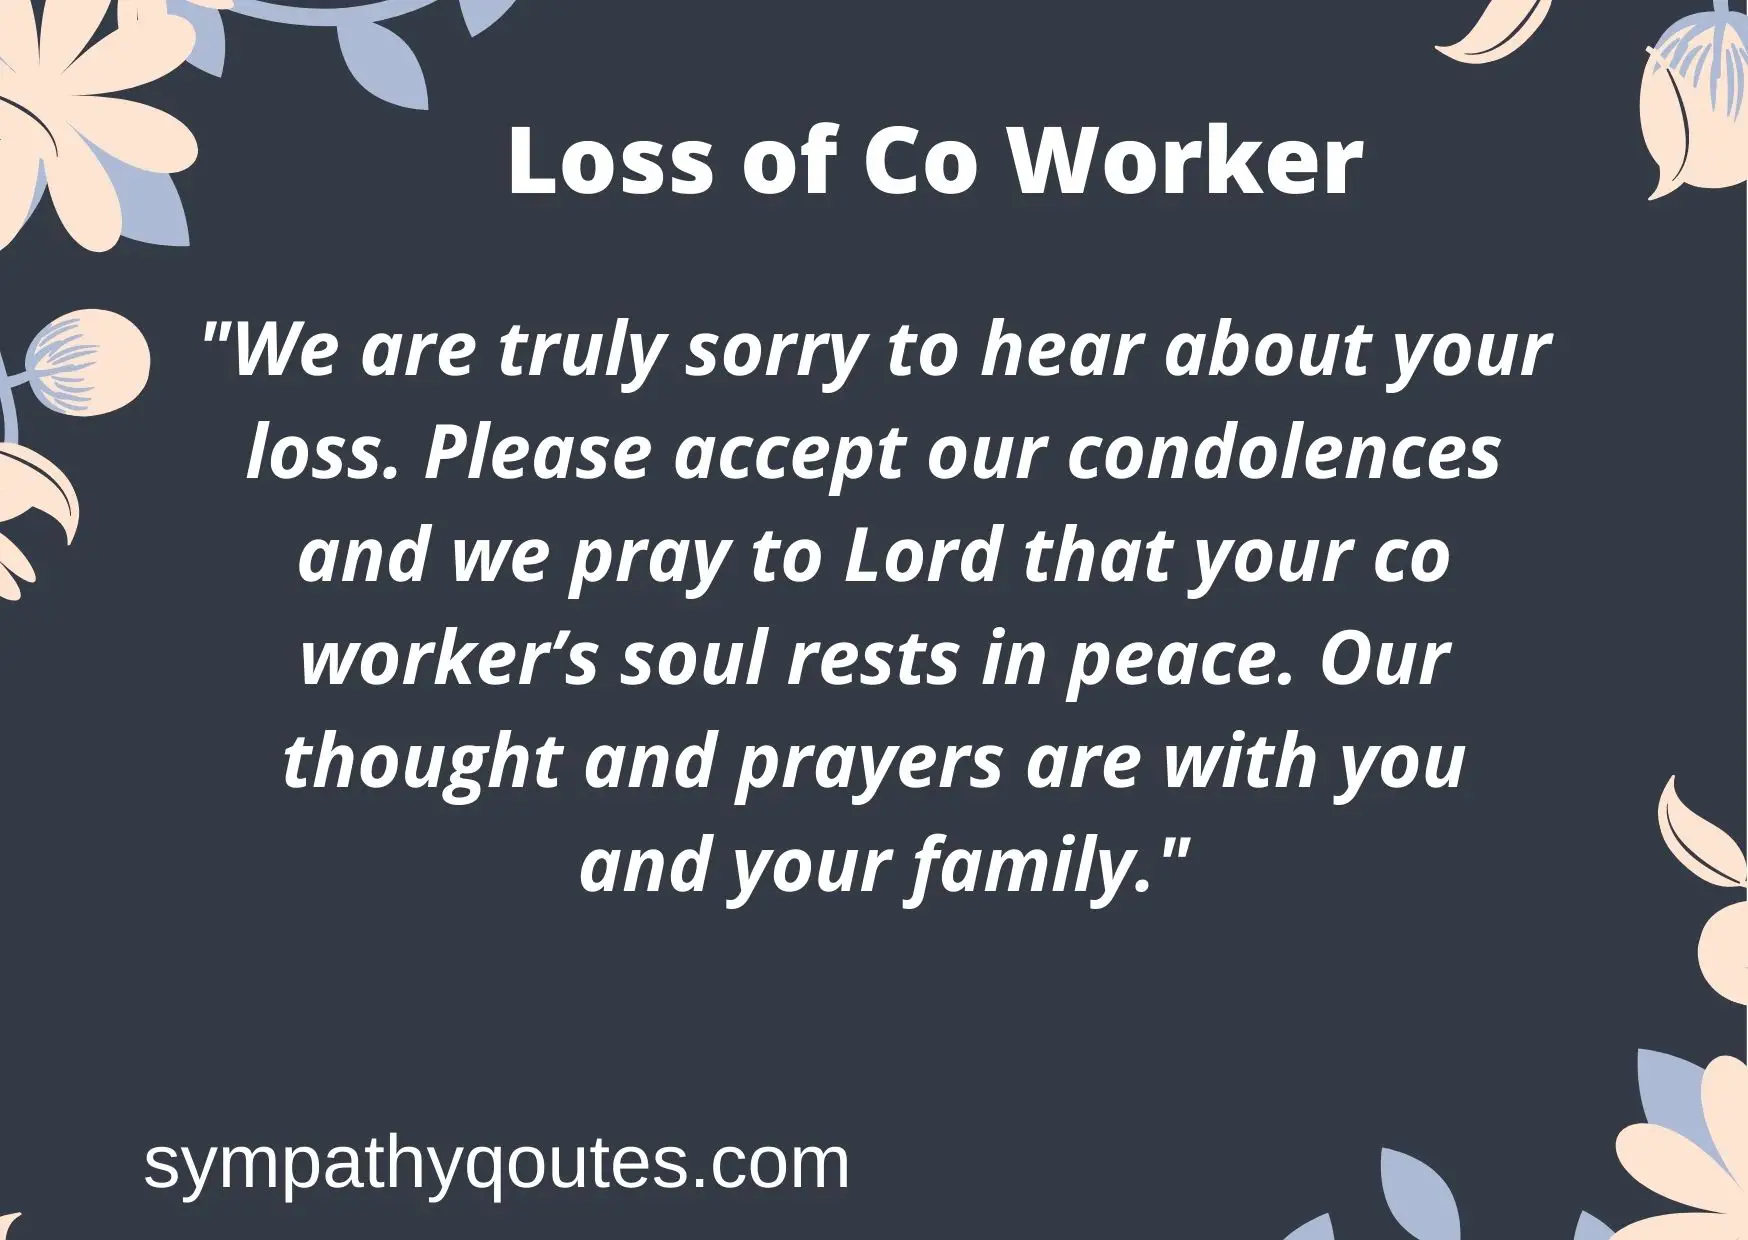 Sympathy Words for a Co-Worker Who Lost